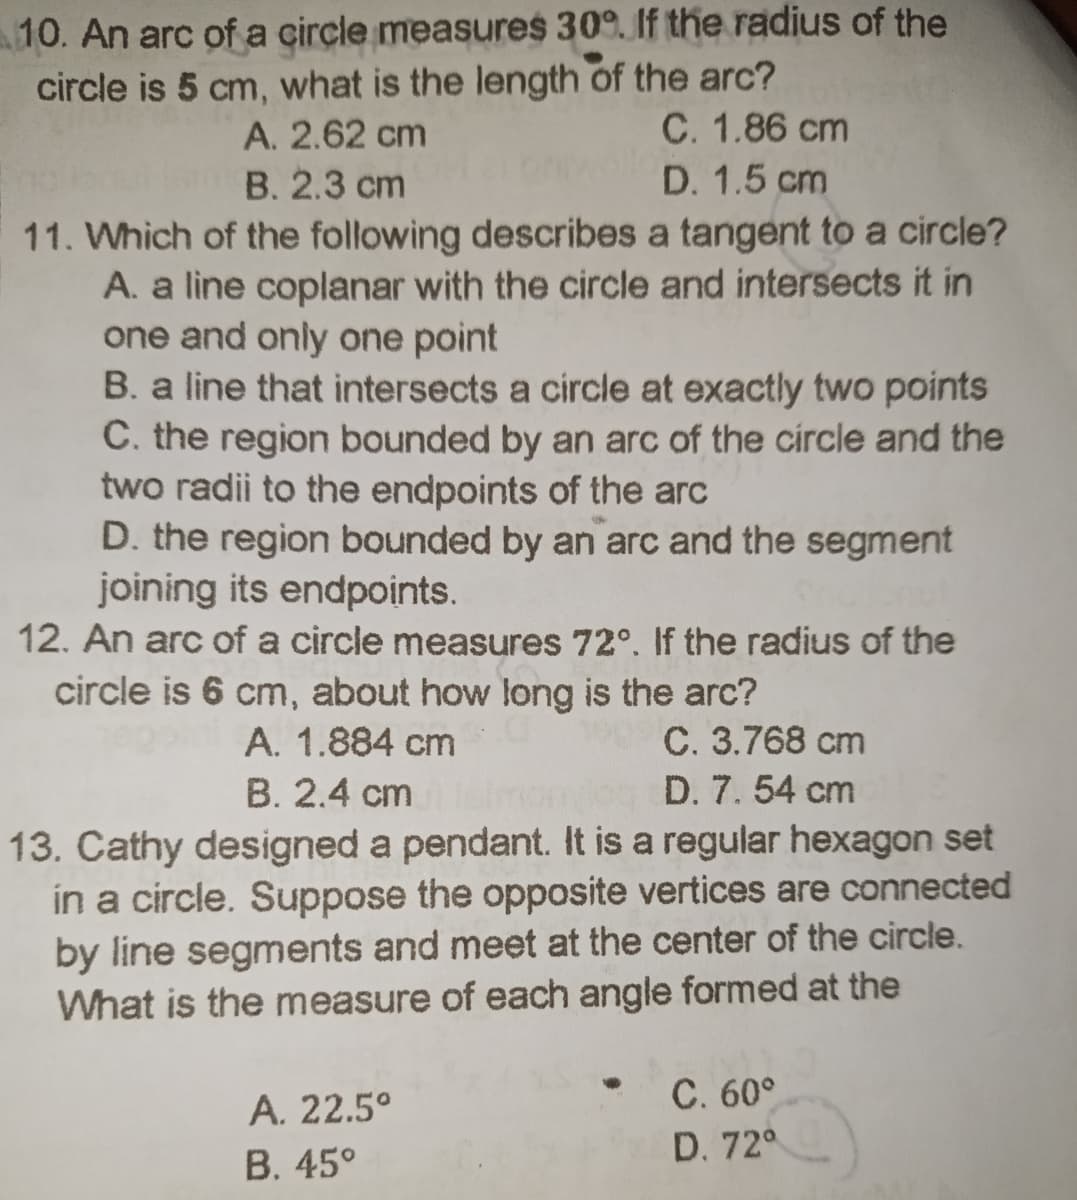 10. An arc of a circle measures 30°. If the radius of the
circle is 5 cm, what is the length of the arc?
C. 1.86 cm
D. 1.5 cm
A. 2.62 cm
B. 2.3 cm
11. Which of the following describes a tangent to a circle?
A. a line coplanar with the circle and intersects it in
one and only one point
B. a line that intersects a circle at exactly two points
C. the region bounded by an arc of the circle and the
two radii to the endpoints of the arc
D. the region bounded by an arc and the segment
joining its endpoints.
12. An arc of a circle measures 72°. If the radius of the
circle is 6 cm, about how long is the arc?
C. 3.768 cm
D. 7.54 cm
A. 1.884 cm
B. 2.4 cm
13. Cathy designed a pendant. It is a regular hexagon set
in a circle. Suppose the opposite vertices are connected
by line segments and meet at the center of the circle.
What is the measure of each angle formed at the
C. 60°
А. 22.5°
В. 45°
D. 72°
